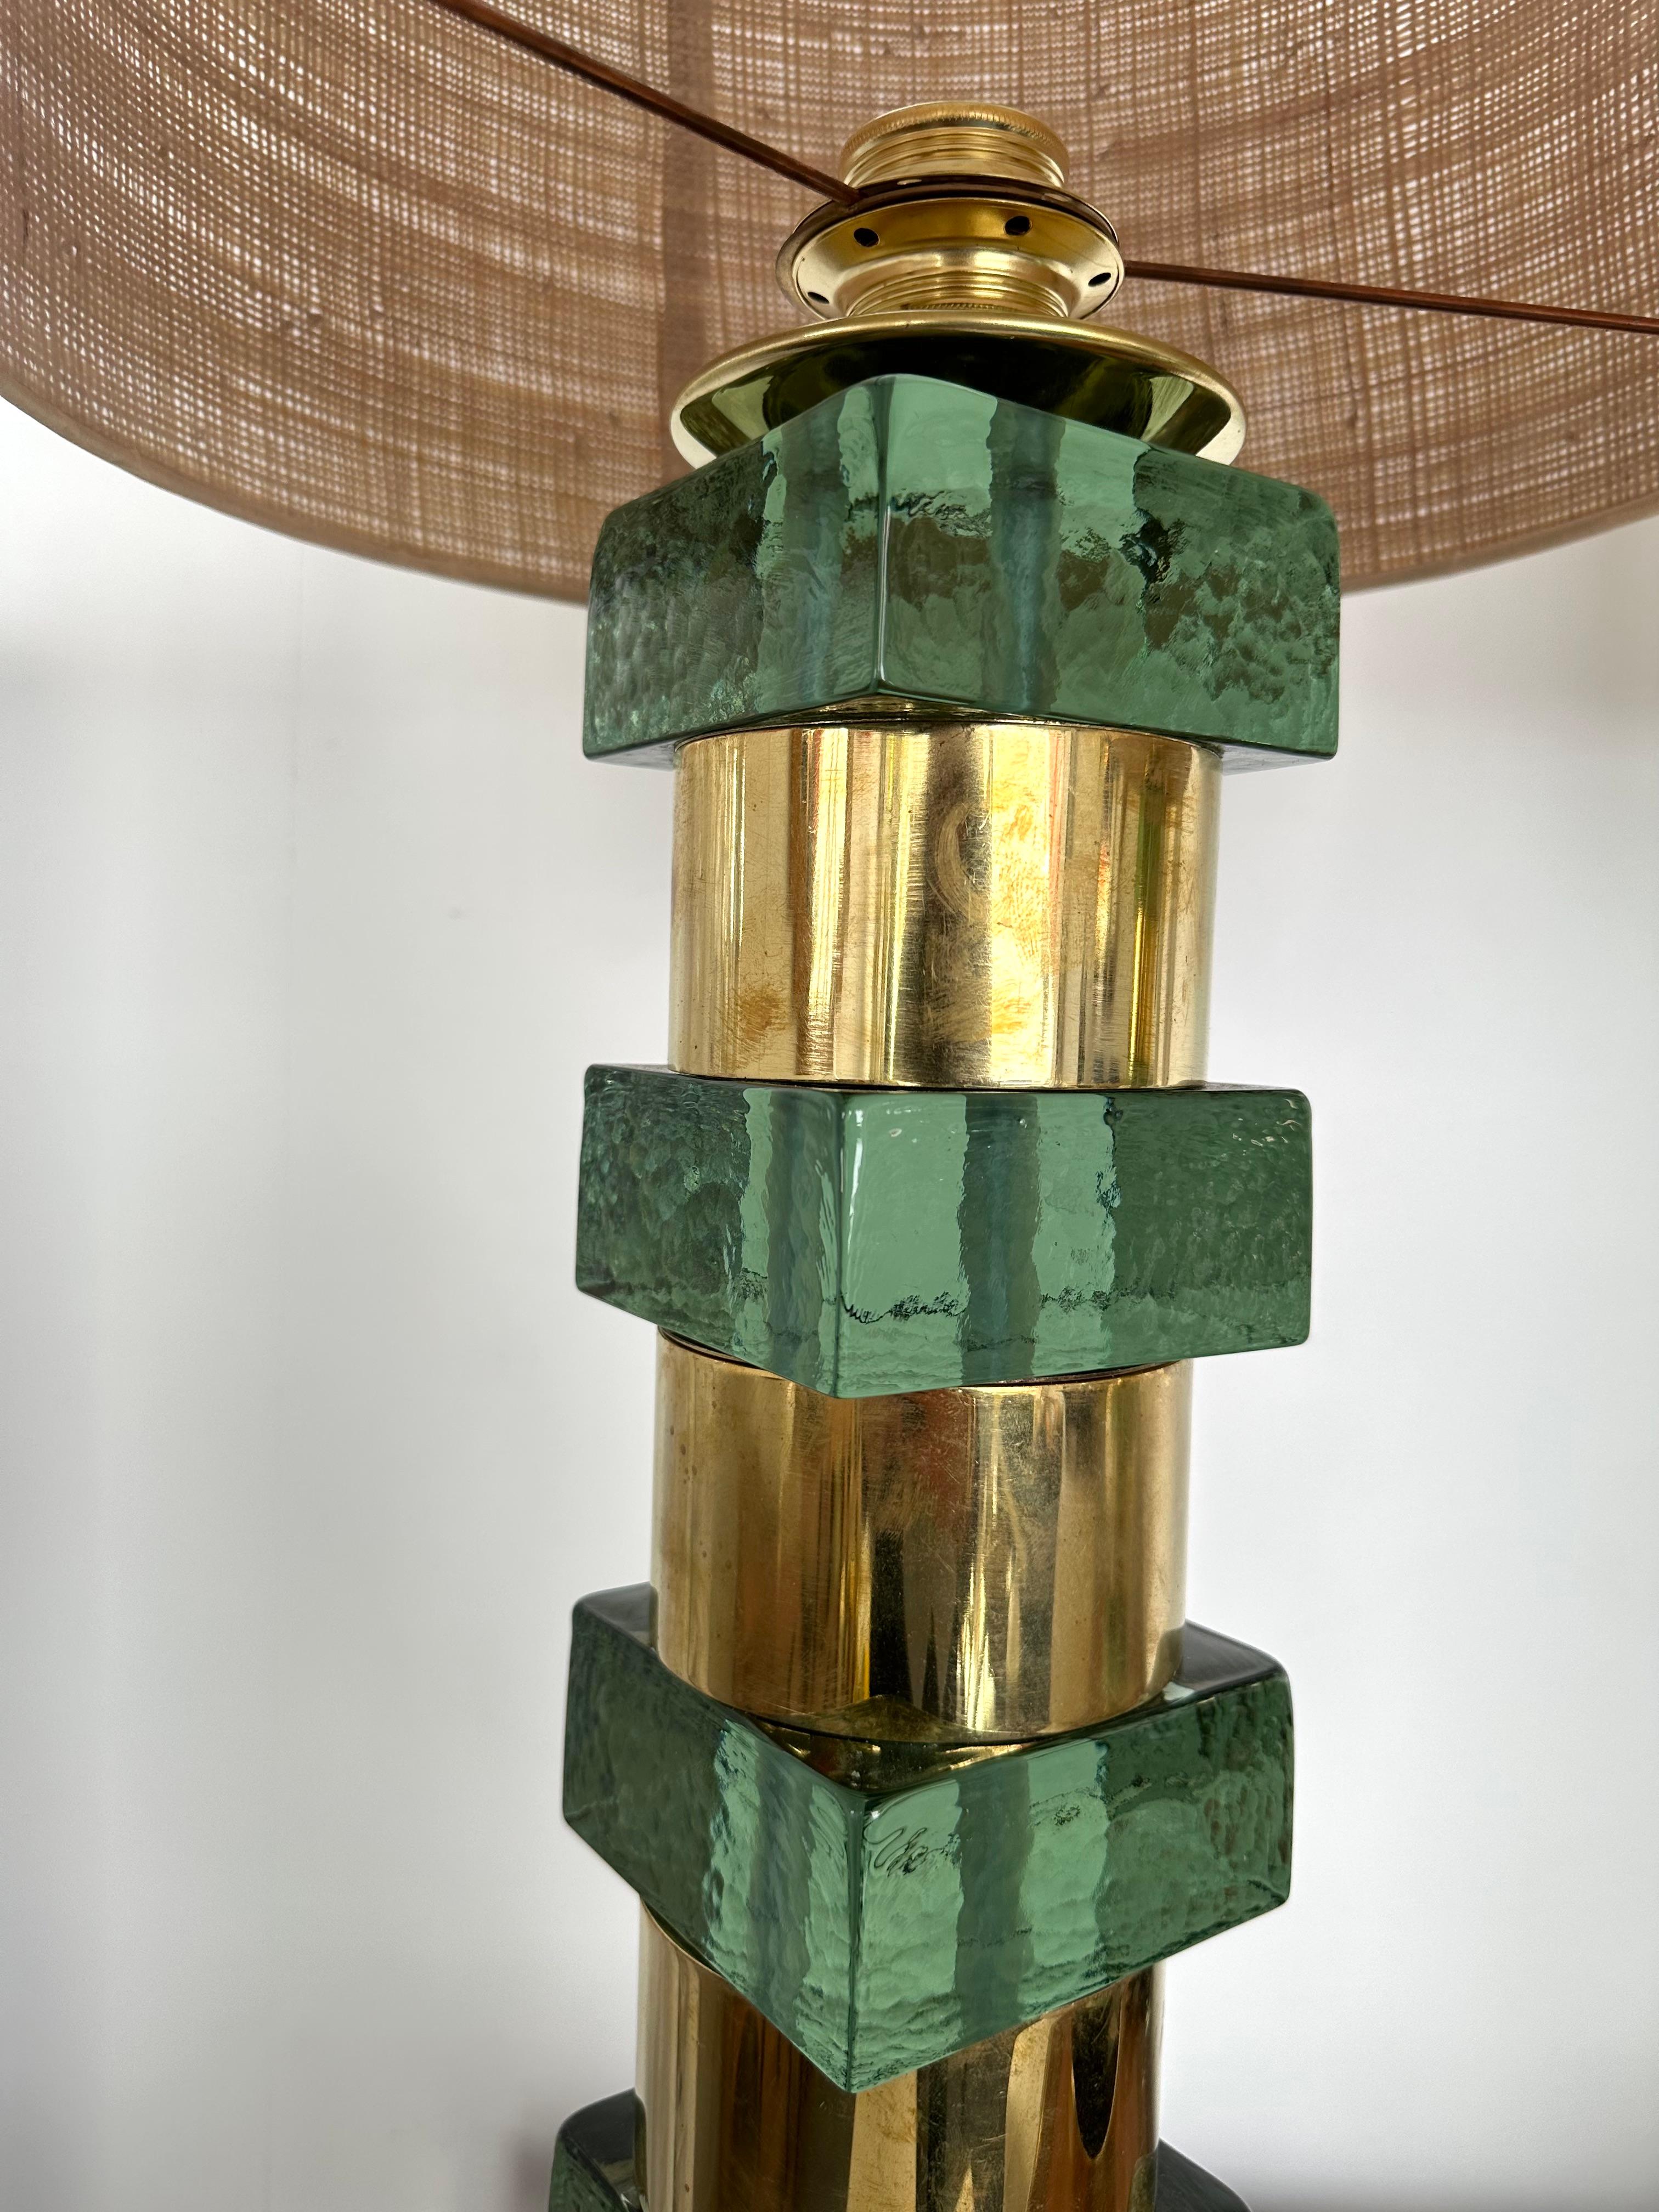 Pair of table or bedside brass lamps, green cube Murano glass. Contemporary work from a small italian artisanal workshop in a Mid-Century Modern Space Age Hollywood Regency, 1970s, 1980s mood.

Demo Shades are not included.
Measurements in